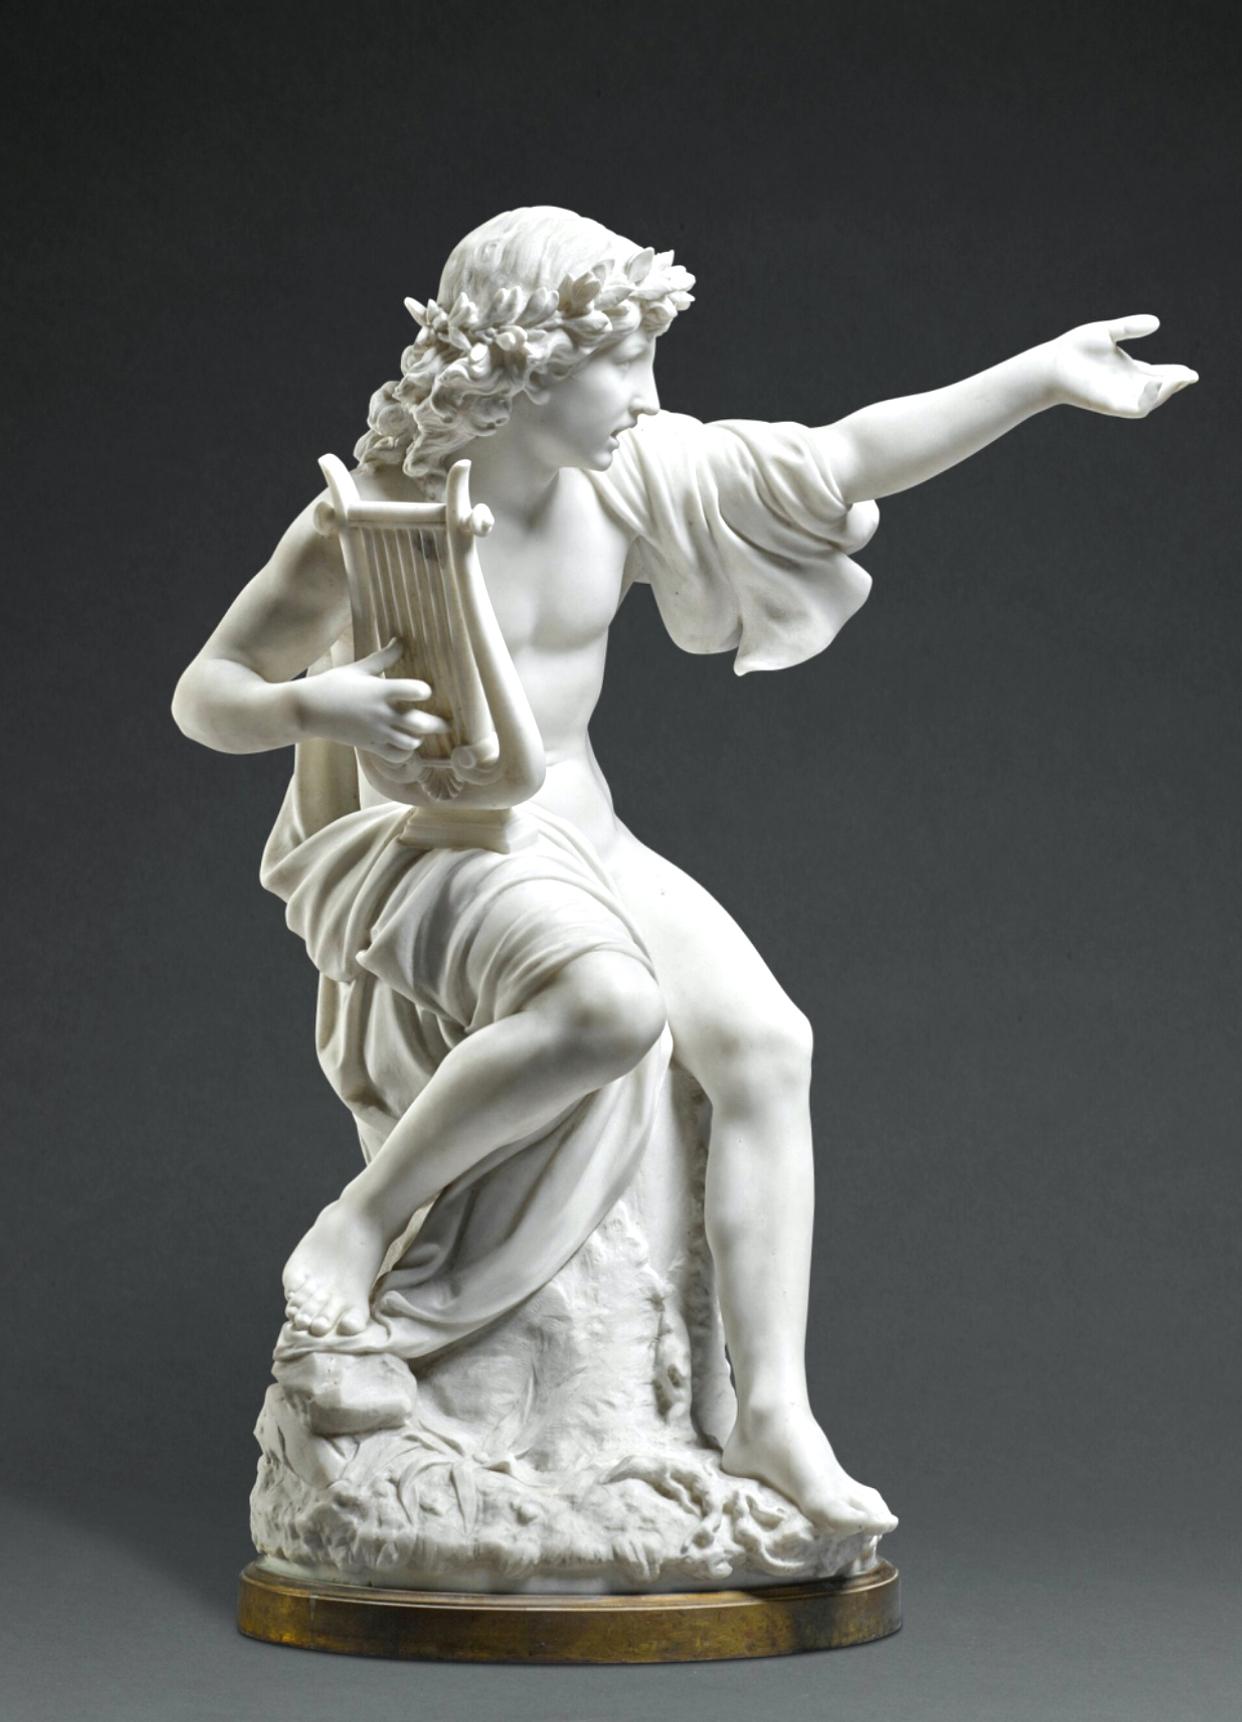 ORPHEUS Neoclassical White Marble Sculpture 19' Century  - Black Nude Sculpture by Henry Dasson 